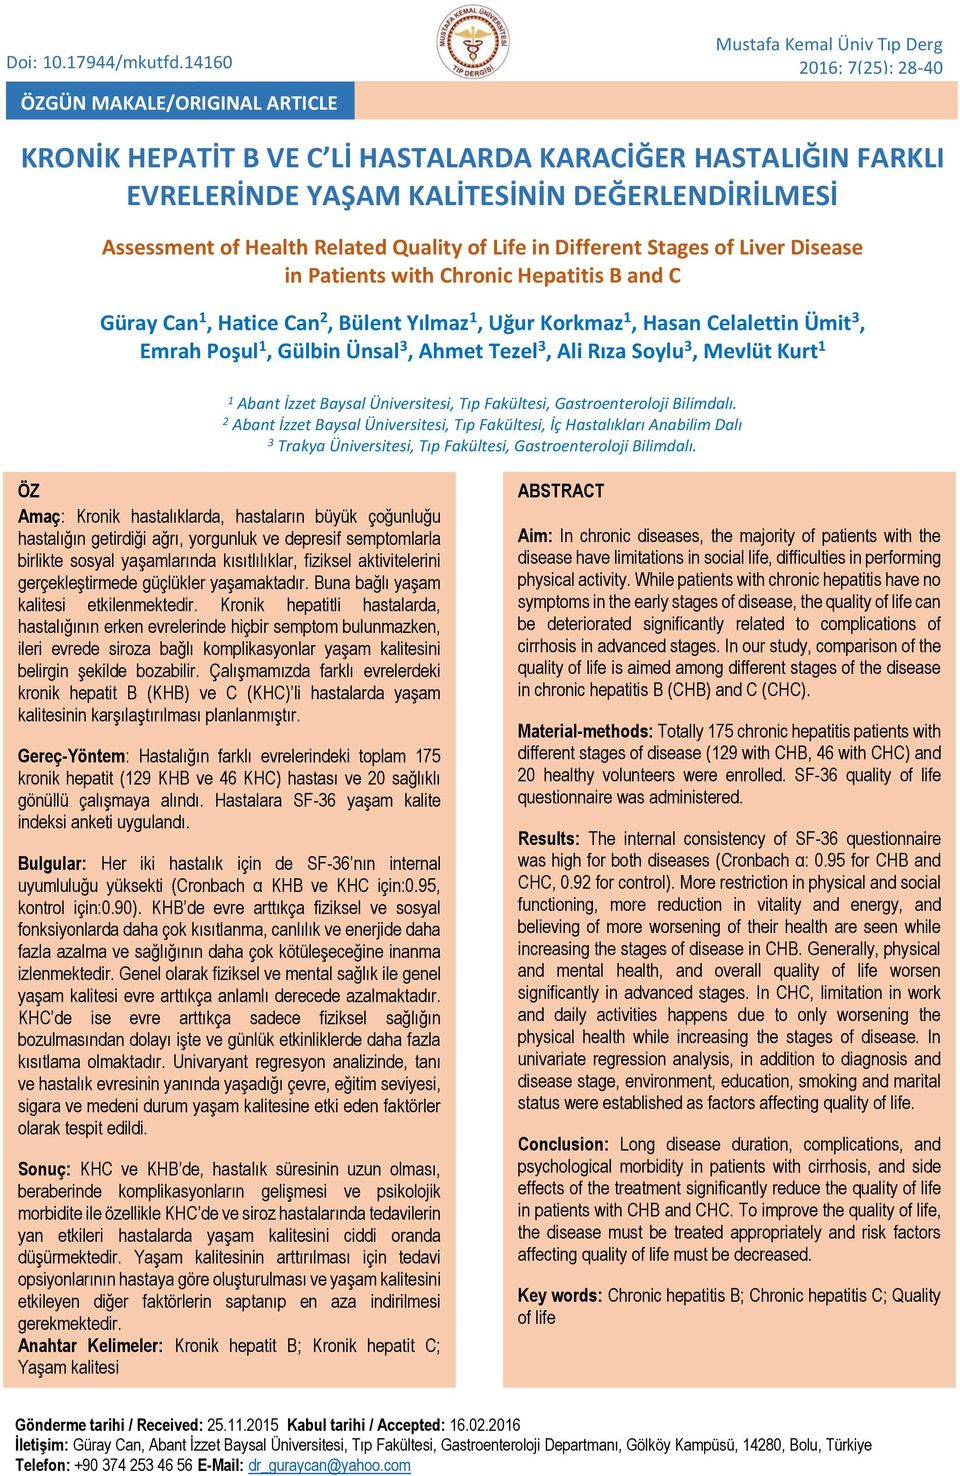 Assessment of Health Related Quality of Life in Different Stages of Liver Disease in Patients with Chronic Hepatitis B and C Güray Can 1, Hatice Can 2, Bülent Yılmaz 1, Uğur Korkmaz 1, Hasan